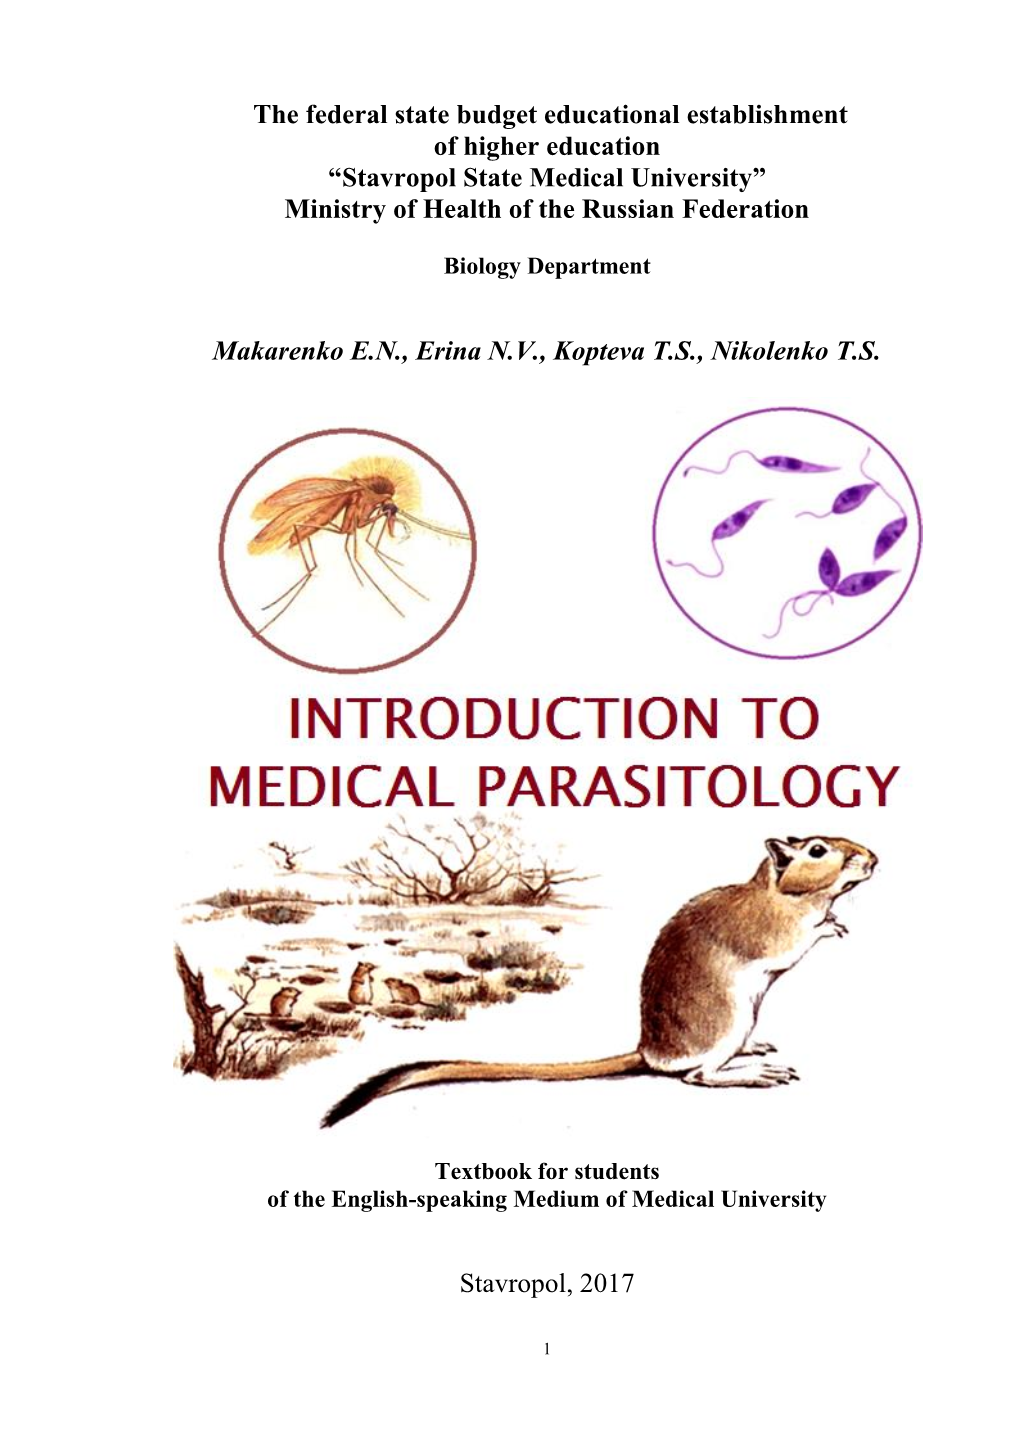 Classification of Parasites in Medical Parasitology